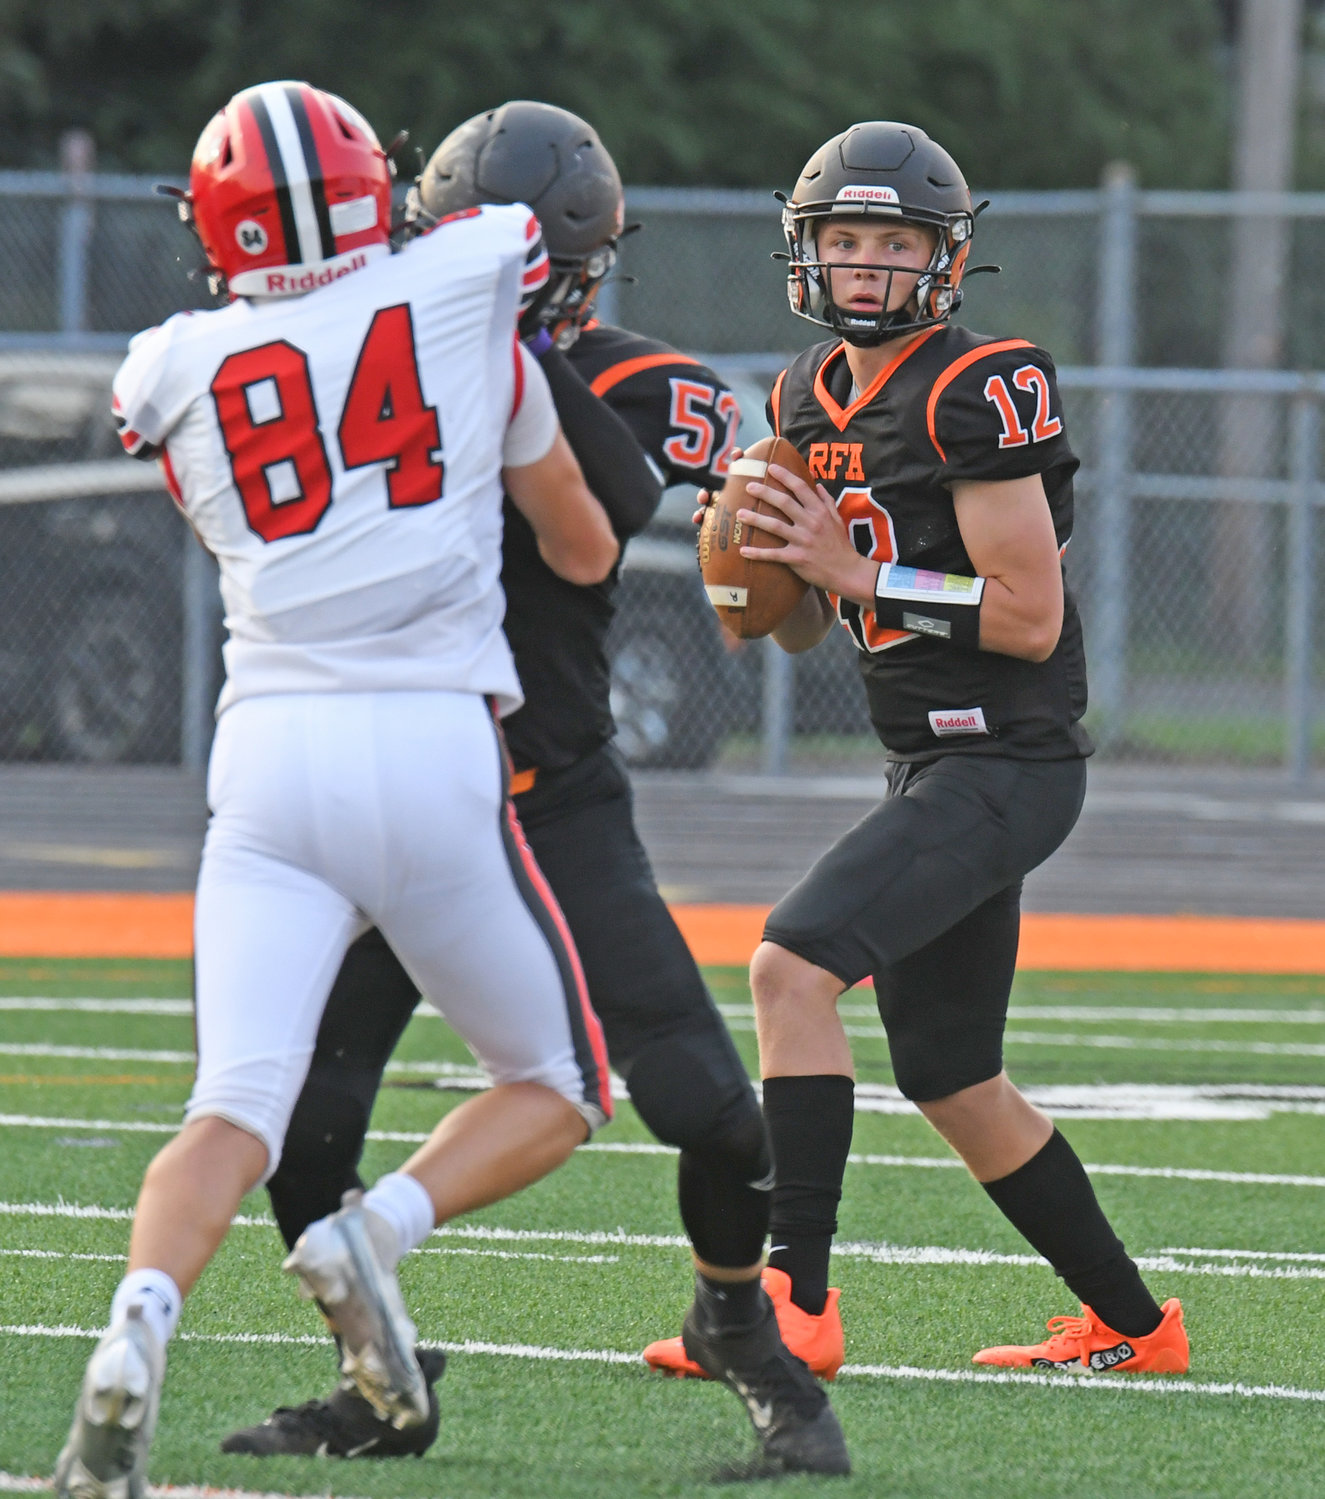 Rome Free Academy quarterback Evan Carlson-Stephenson looks for an open receiver with Josiah Holmes blocking Baldwinsville's Lucas Fawcett on the play in the first quarter at RFA Stadium Friday night. Carlson-Stephenson threw for 192 yards and two scores but the Black Knights lost 55-13.